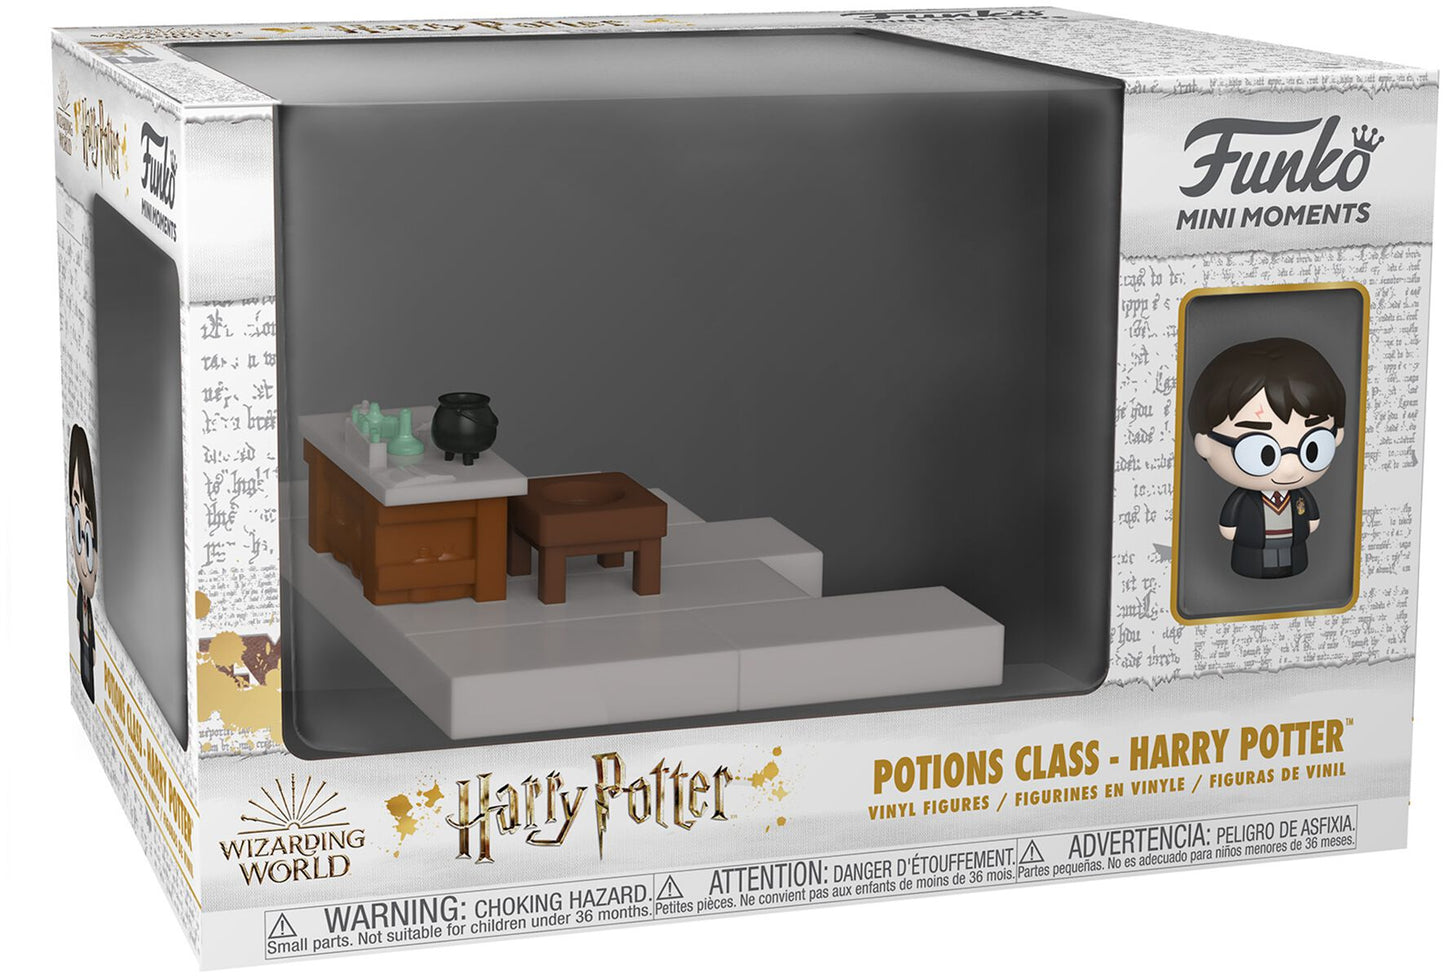 HARRY POTTER Funko Pop! - Harry Potter - Potions Class (Chase Edition possible) (Funko Mini Moments)